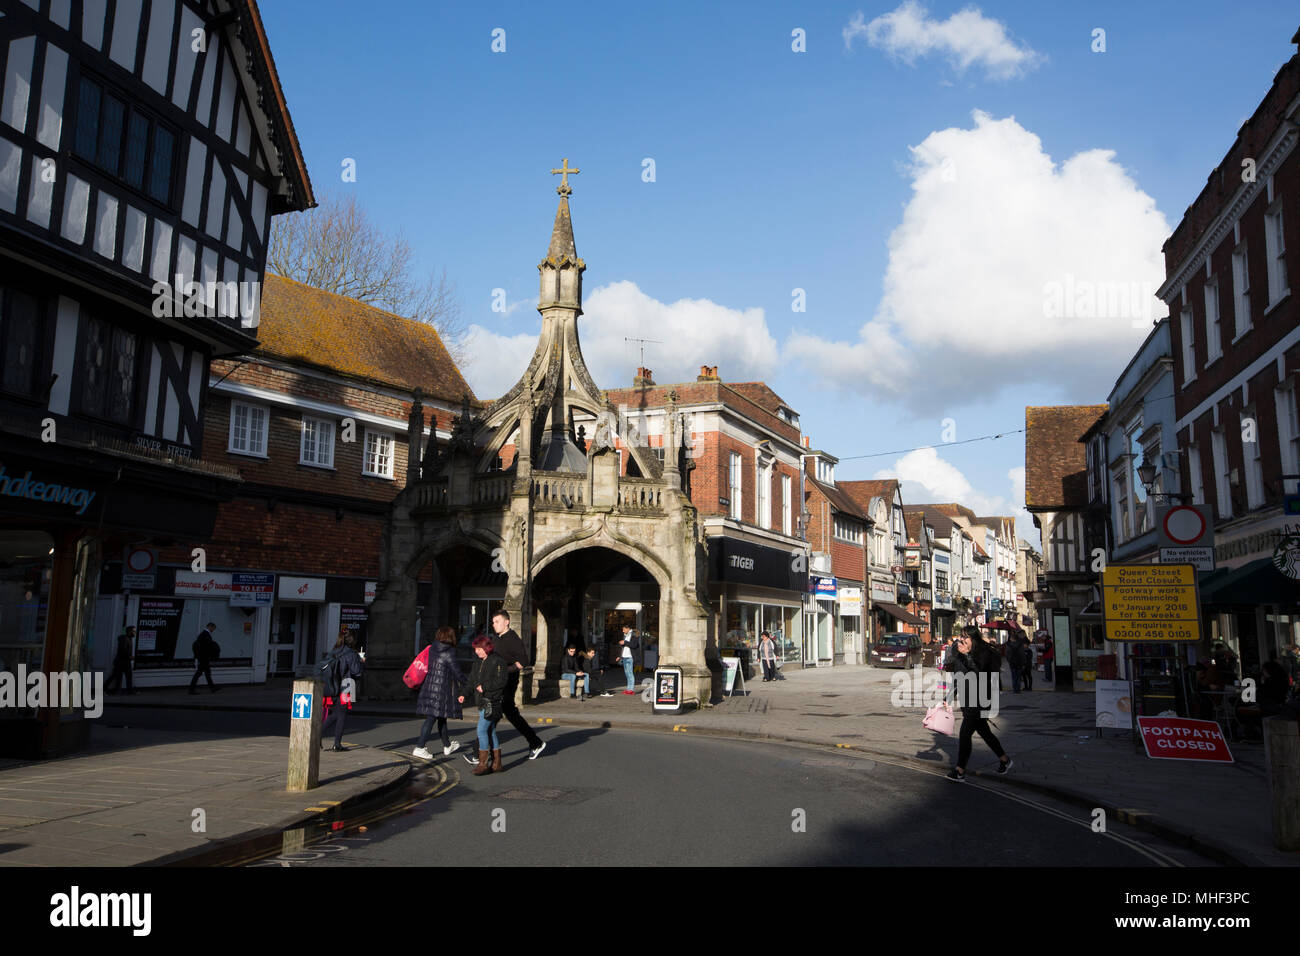 Salisbury Cathedral town where in the distance investigations continue to investigate the nerve agent attack on Sergei and Yulia Skripal, Wiltshire UK Stock Photo